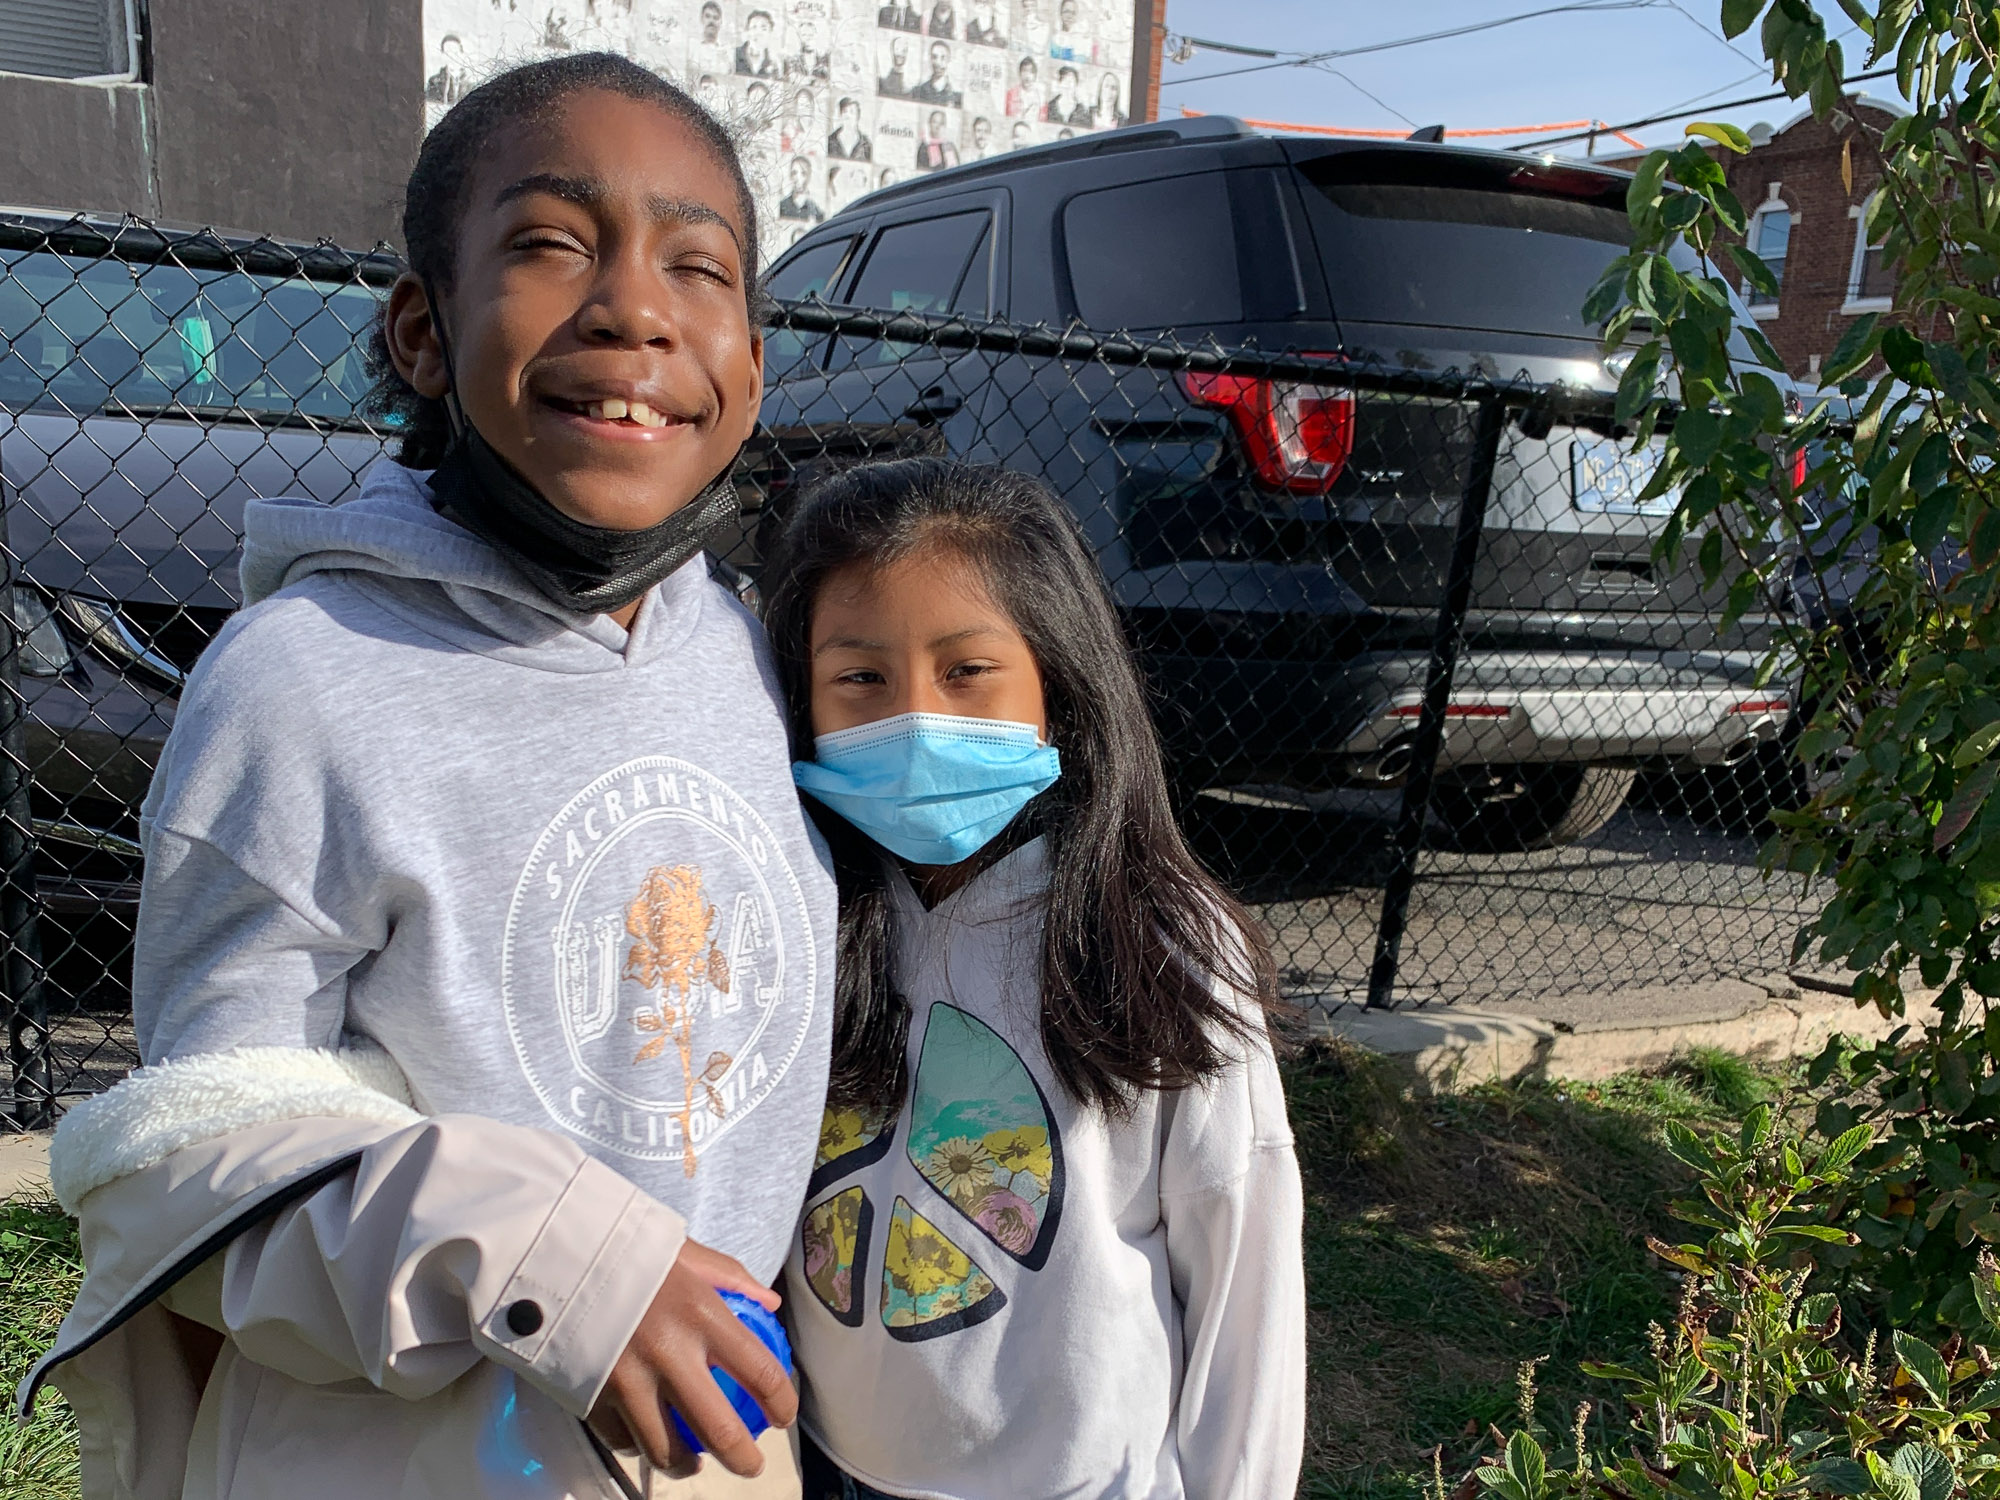 Two fourth grade students wearing hoodies pose together for a portrait in a small green space next to a parking lot.